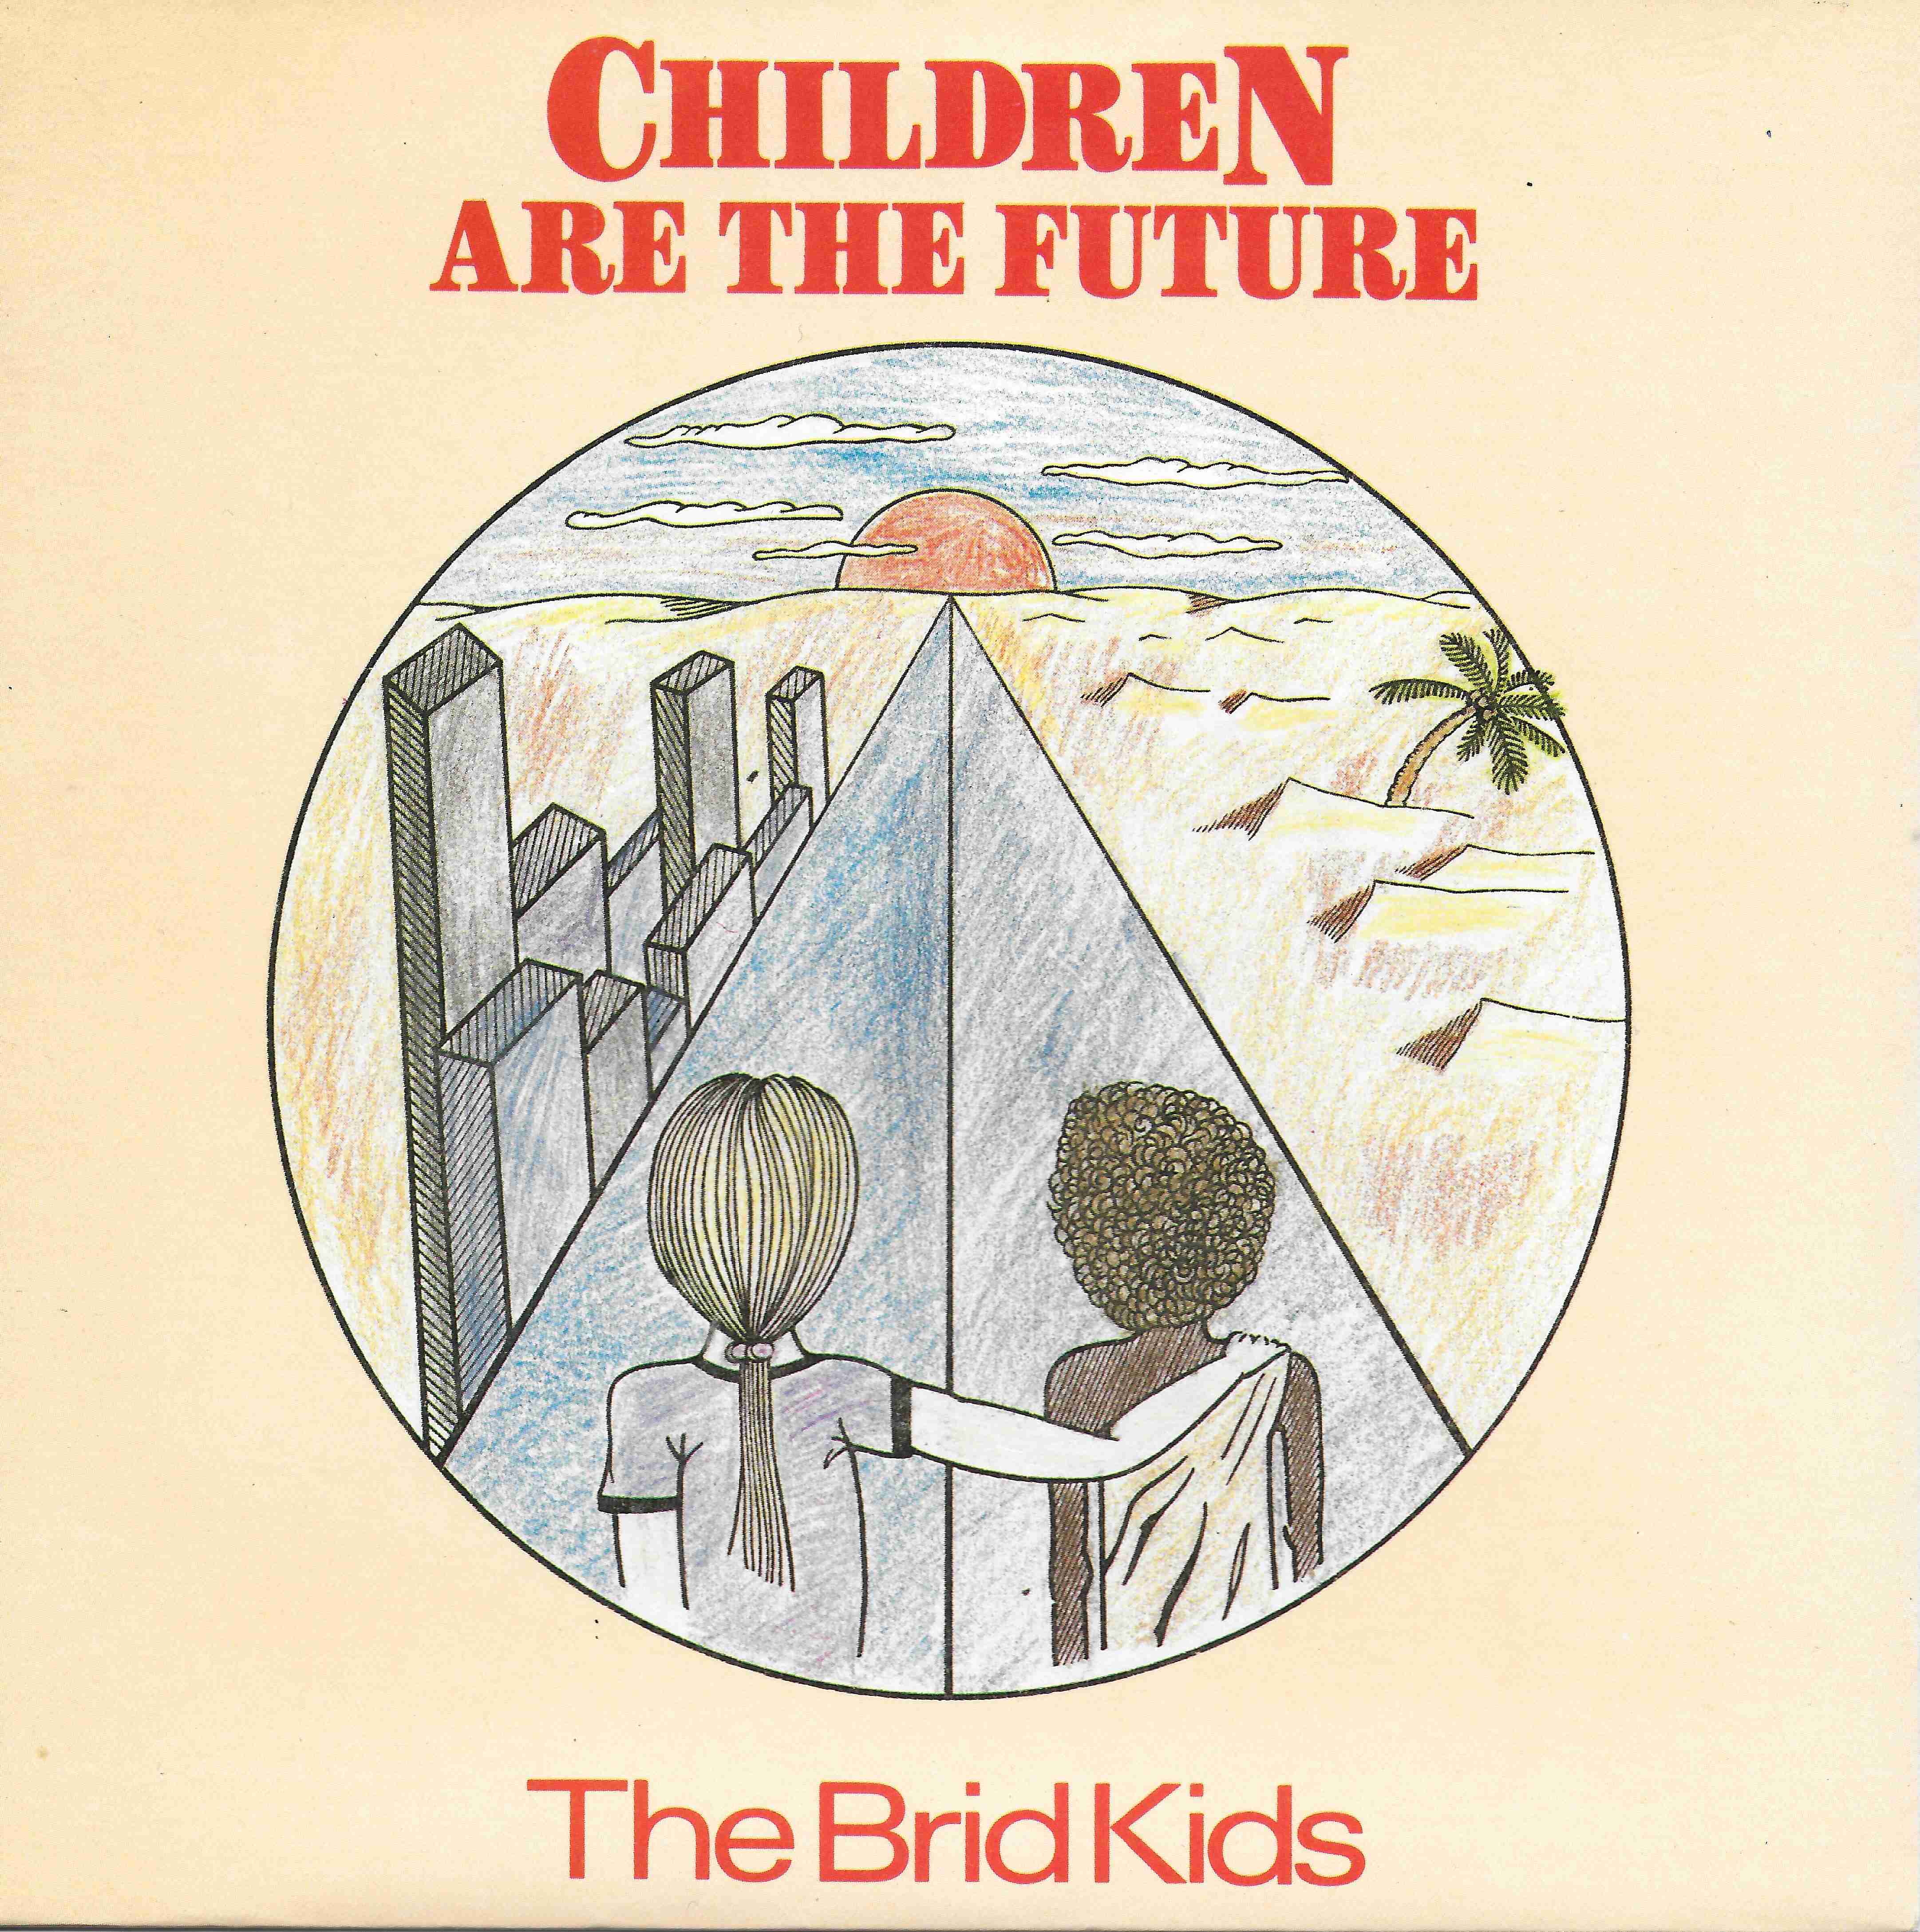 Picture of RESL 232 Children are the future (BBC Children In Need) by artist The Brid Kids from the BBC records and Tapes library